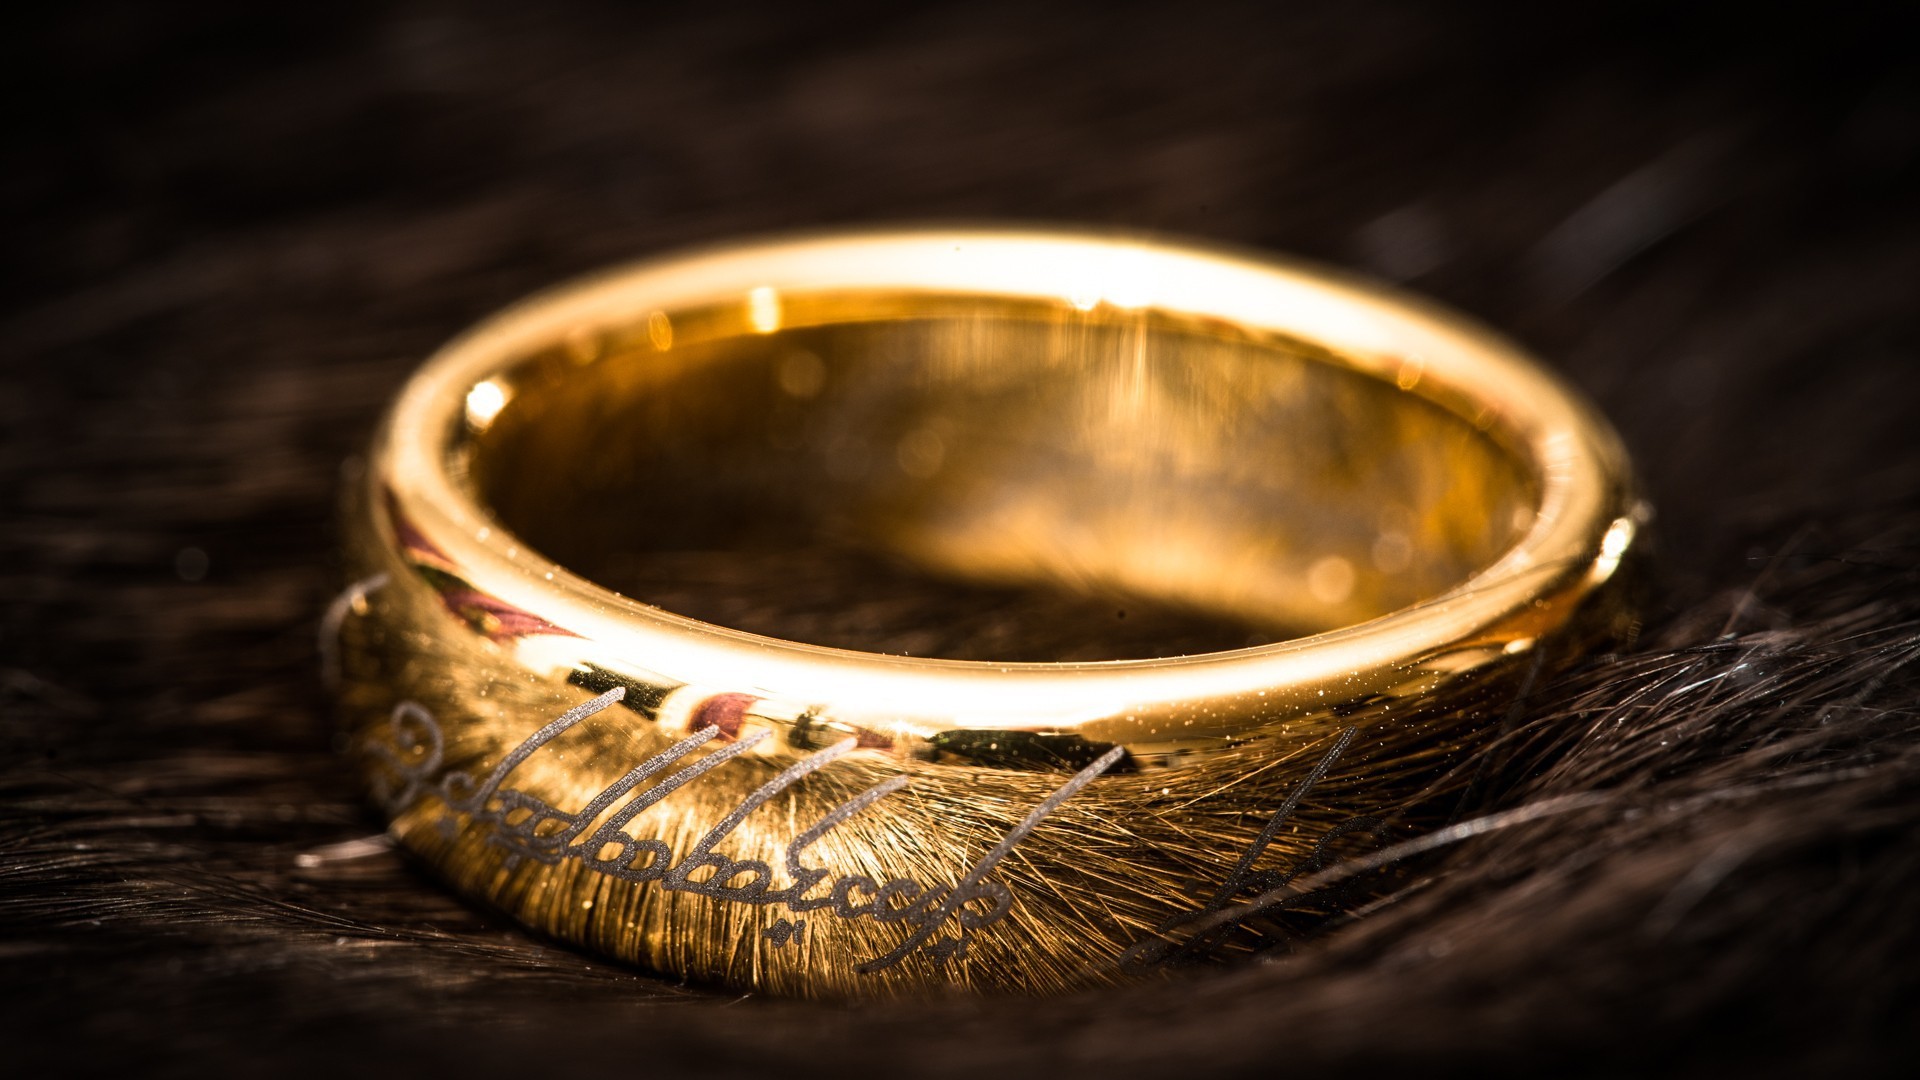 lord of the rings wallpaper hd,ring,fashion accessory,wedding ring,metal,gold